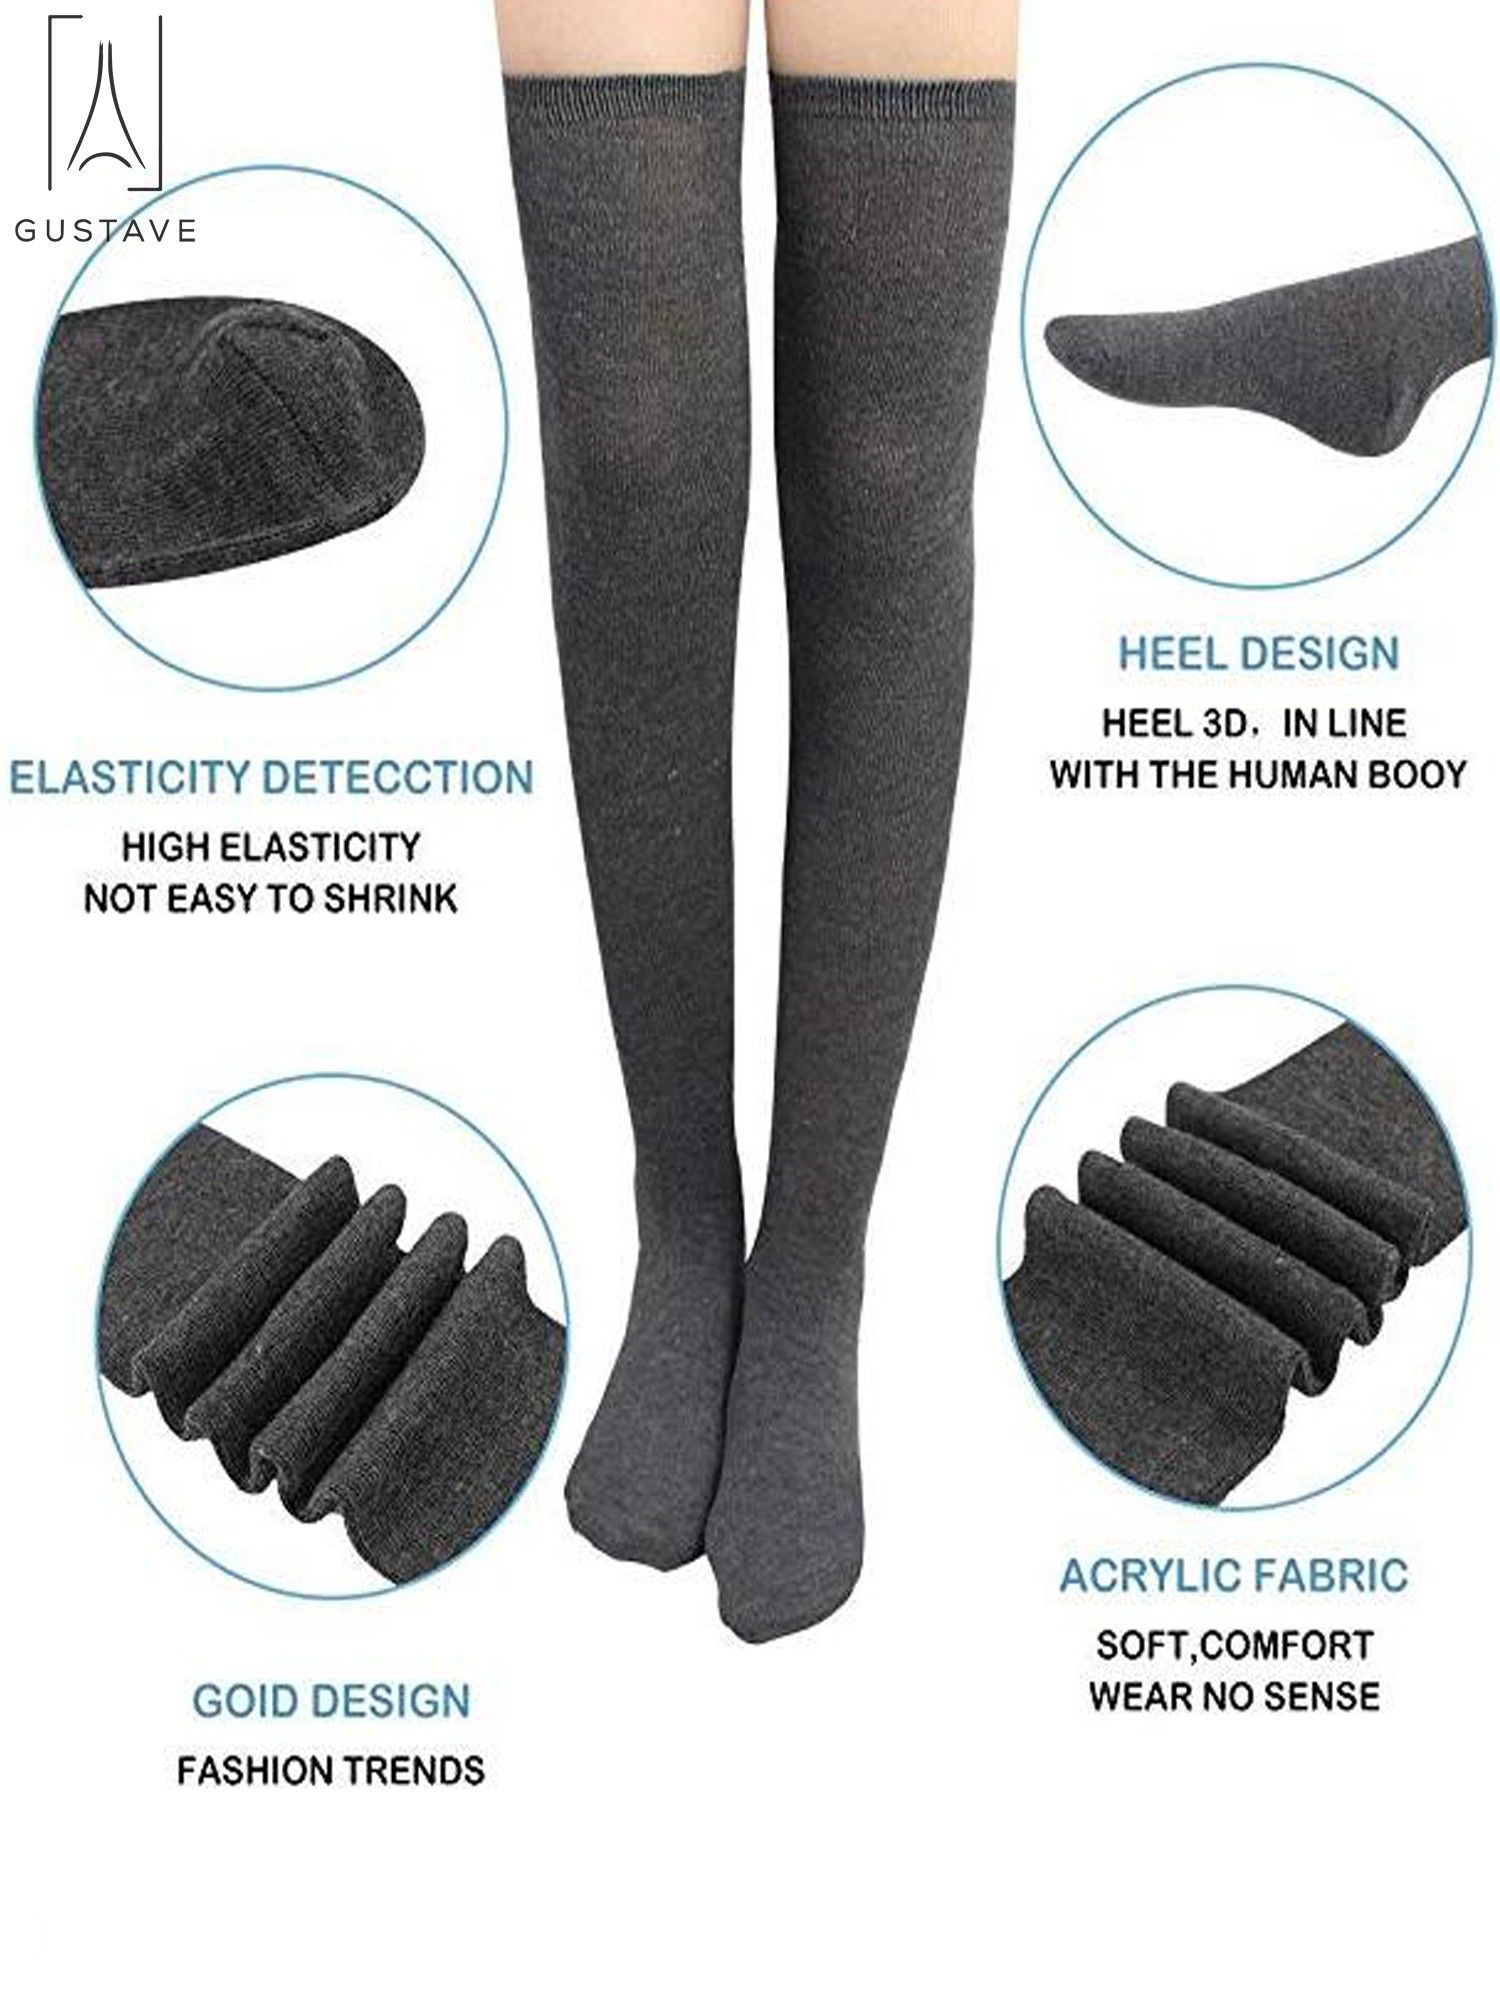 Gustave 2 Paris Women Girl Extra Long Fashion Thigh High Socks over the Knee High Boot Stockings Leg Warmers Lady Party Dress "Gray, 2 Pair" - image 5 of 10